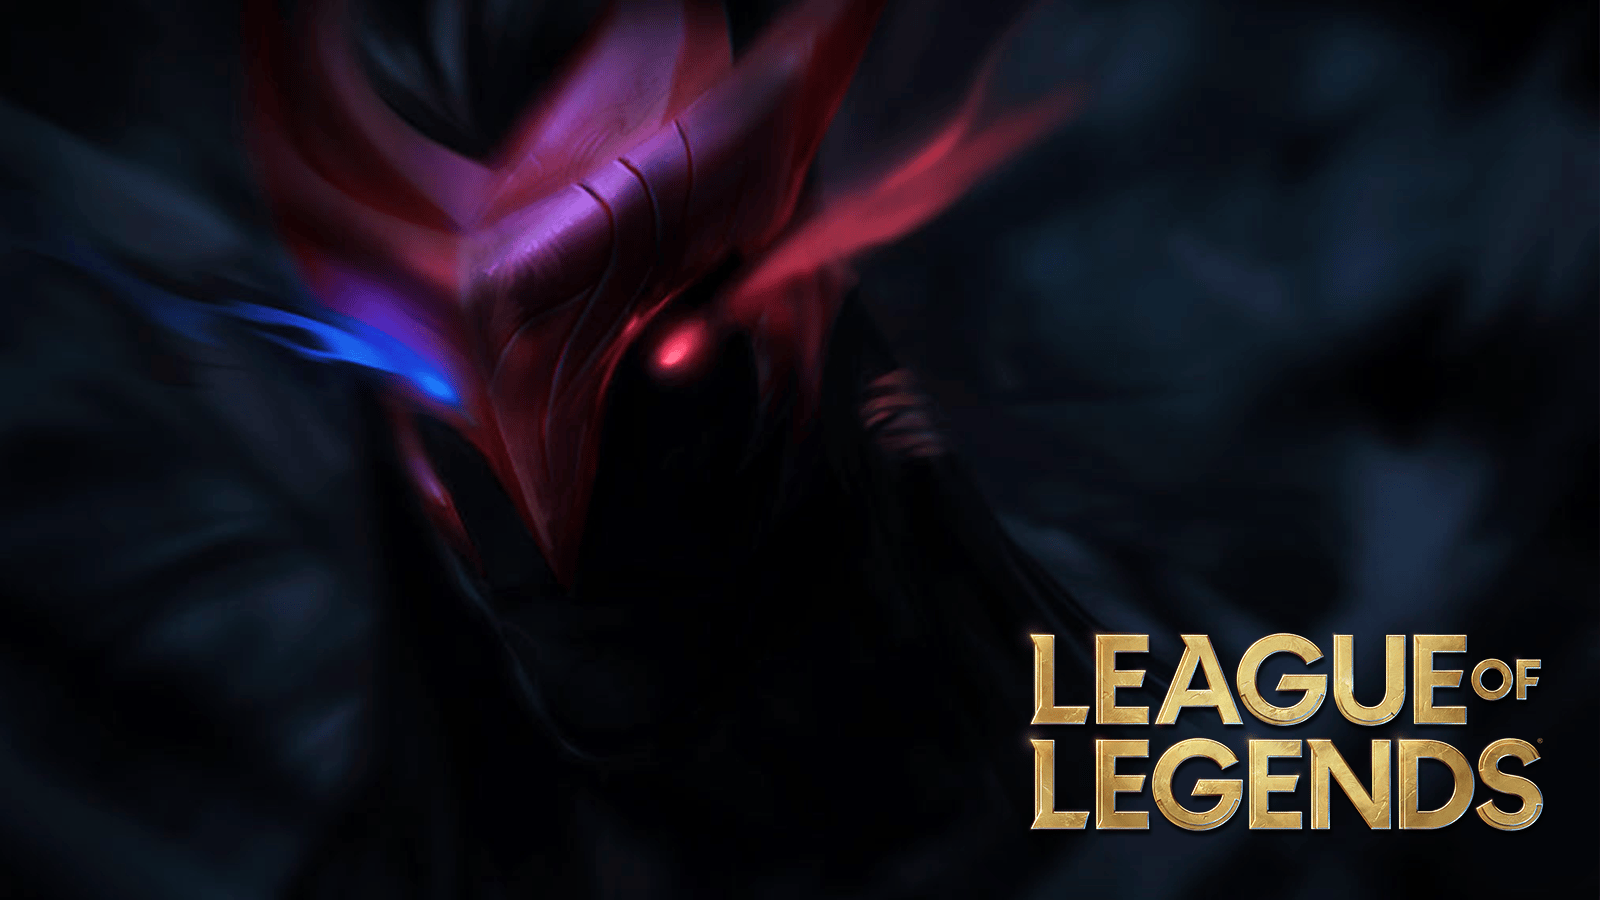 Yone teaser image with League of Legends logo.